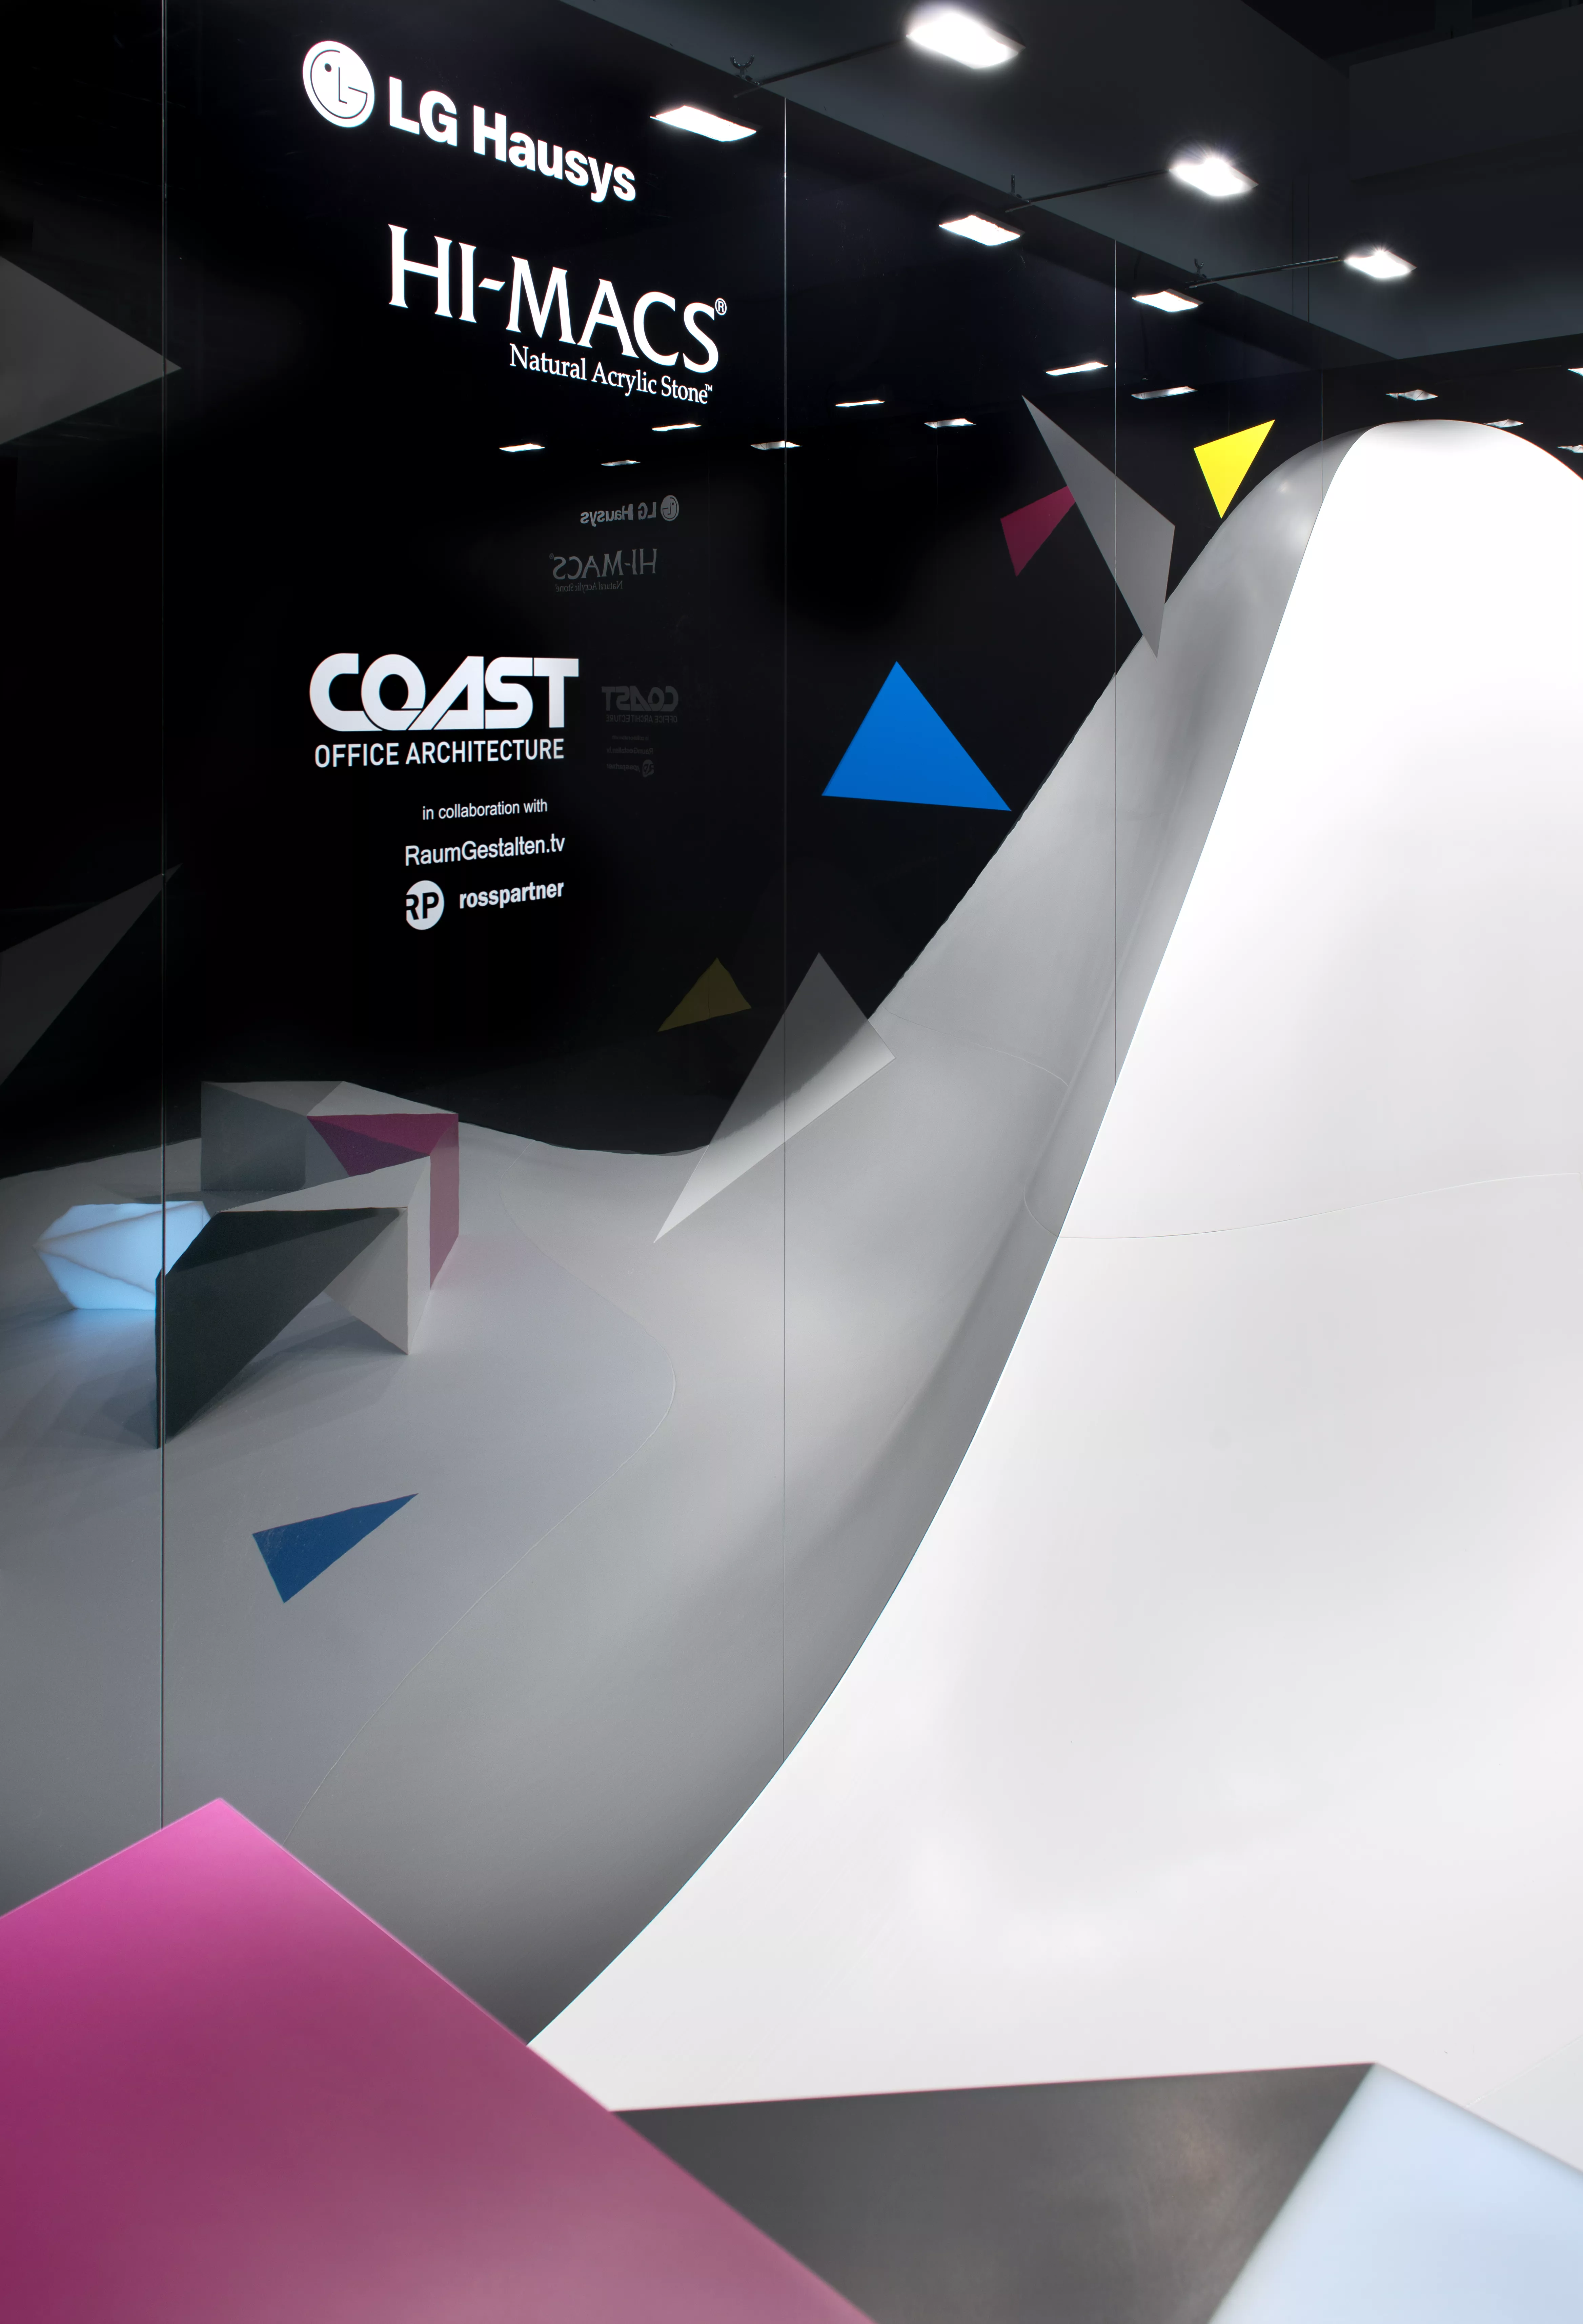 HIMACS at BAU 2015 with COAST OFFICE ARCHITECTURE